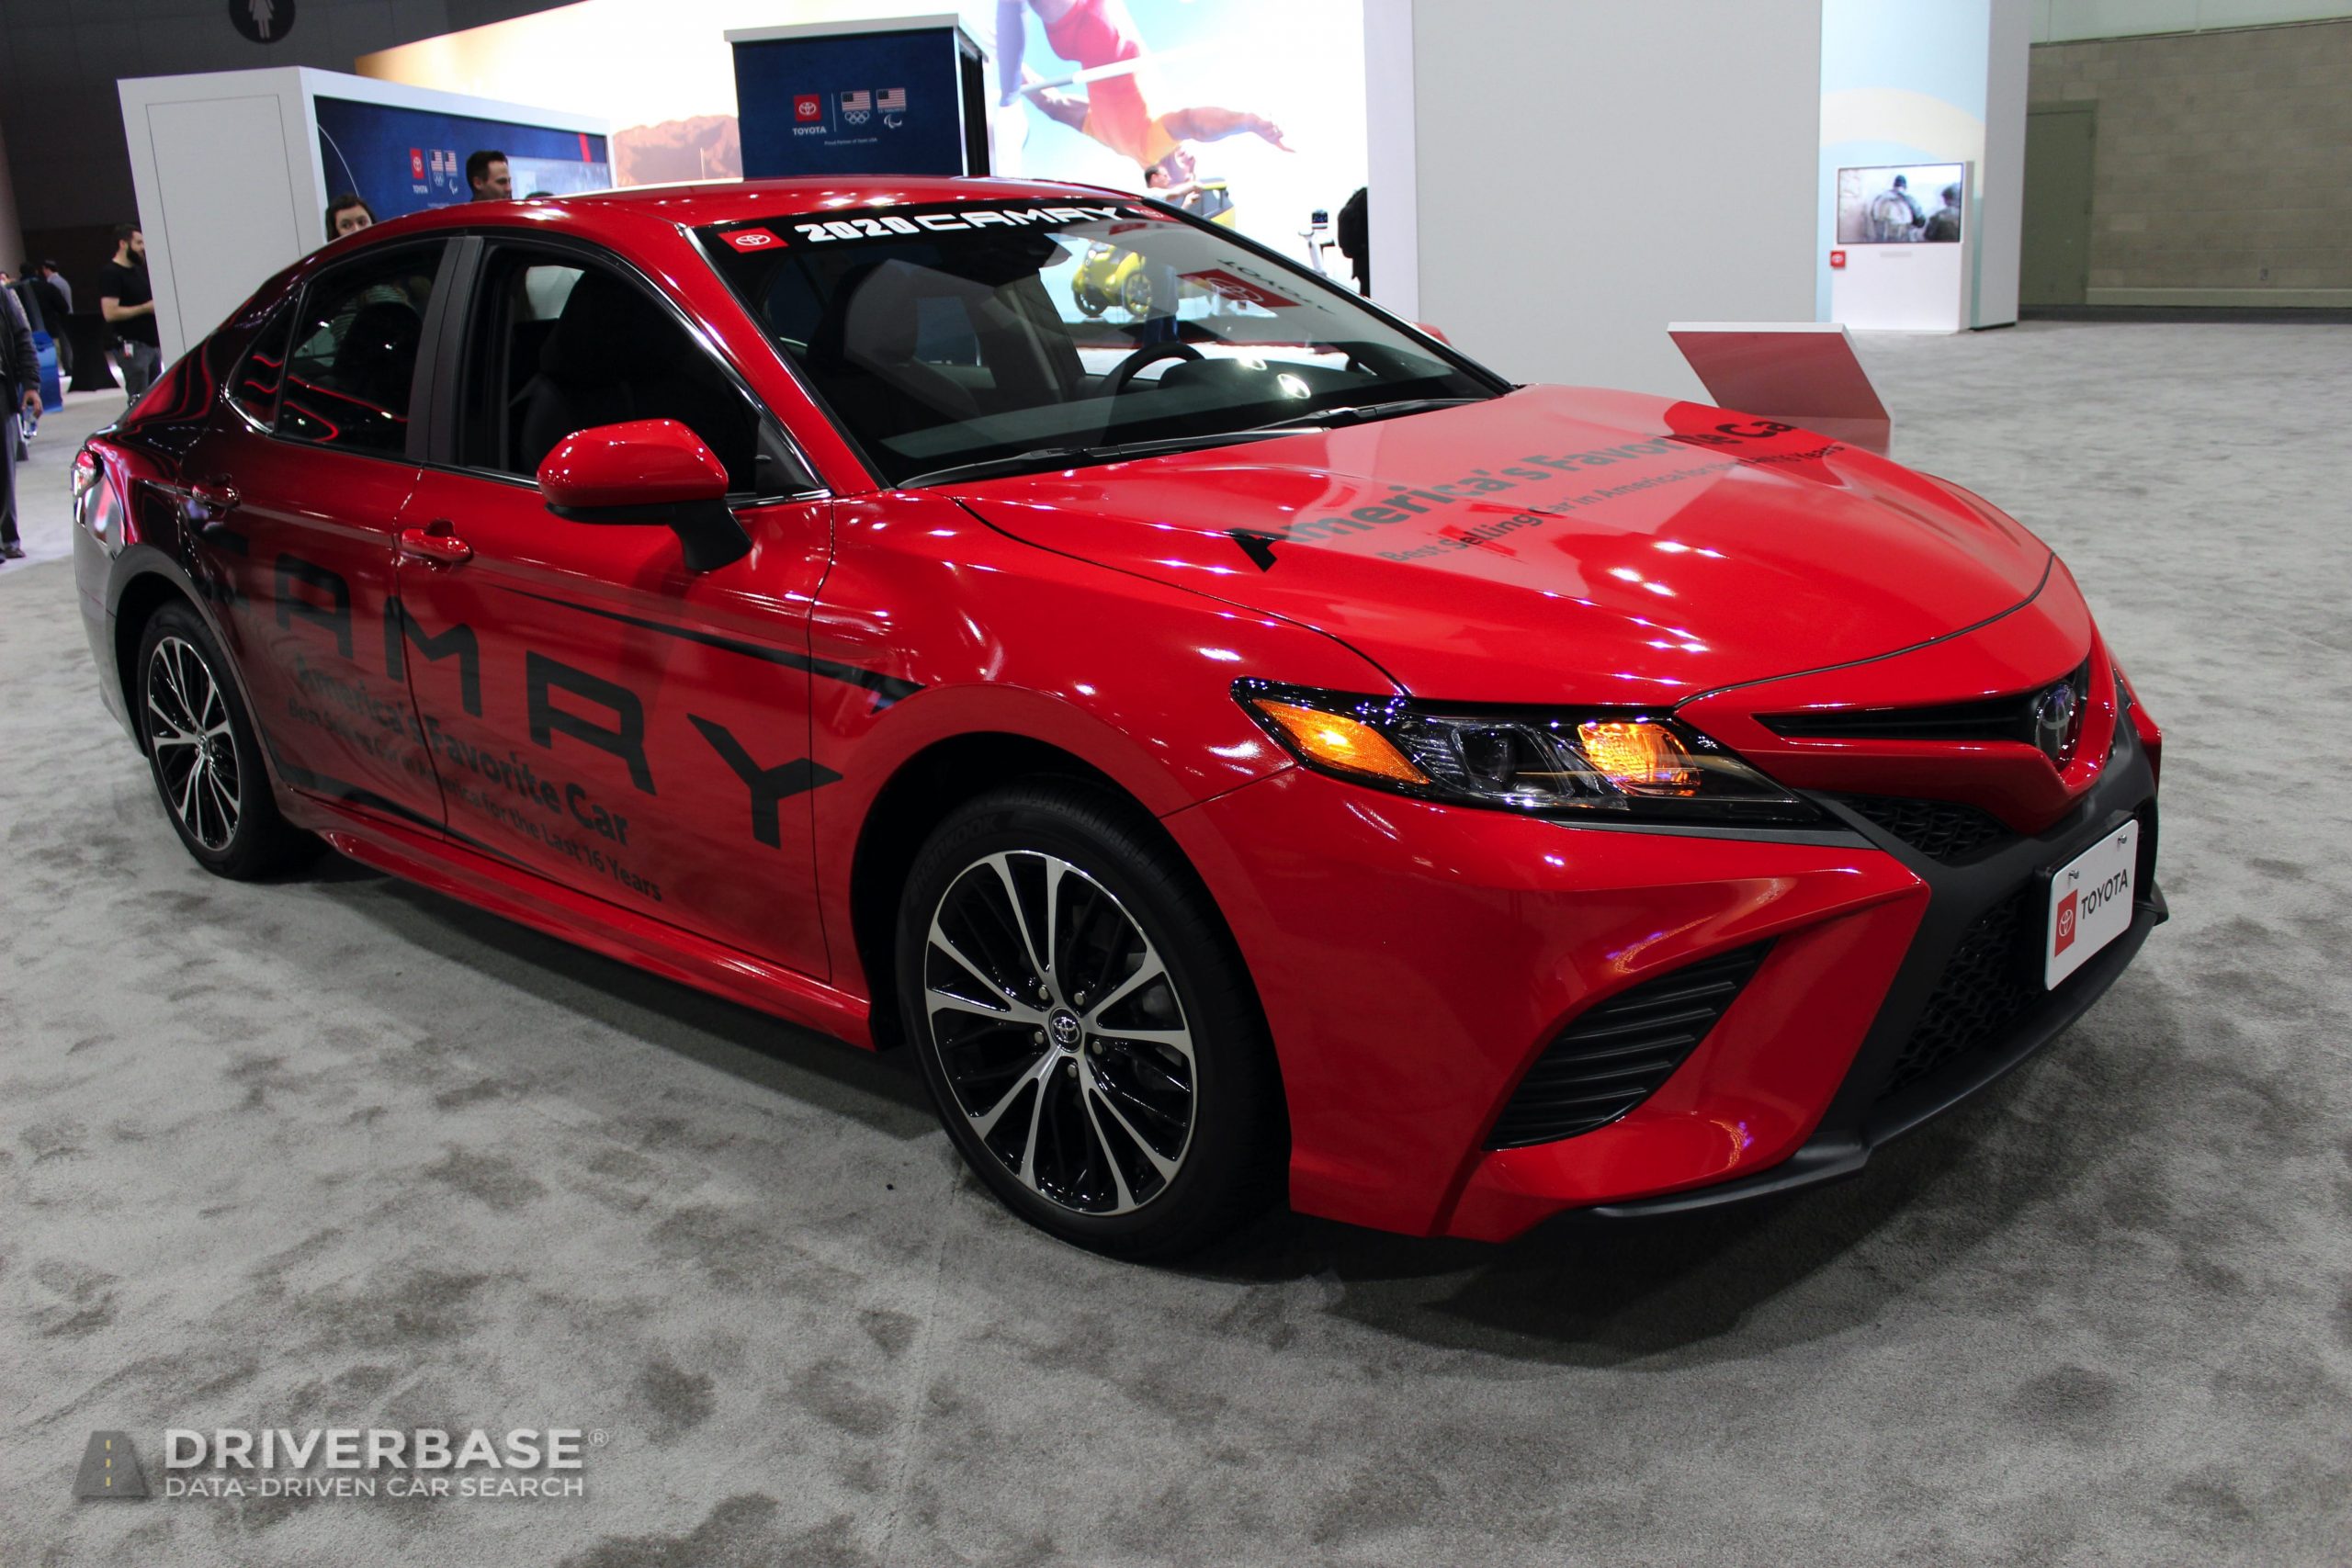 2020 Toyota Camry at the 2019 Los Angeles Auto Show